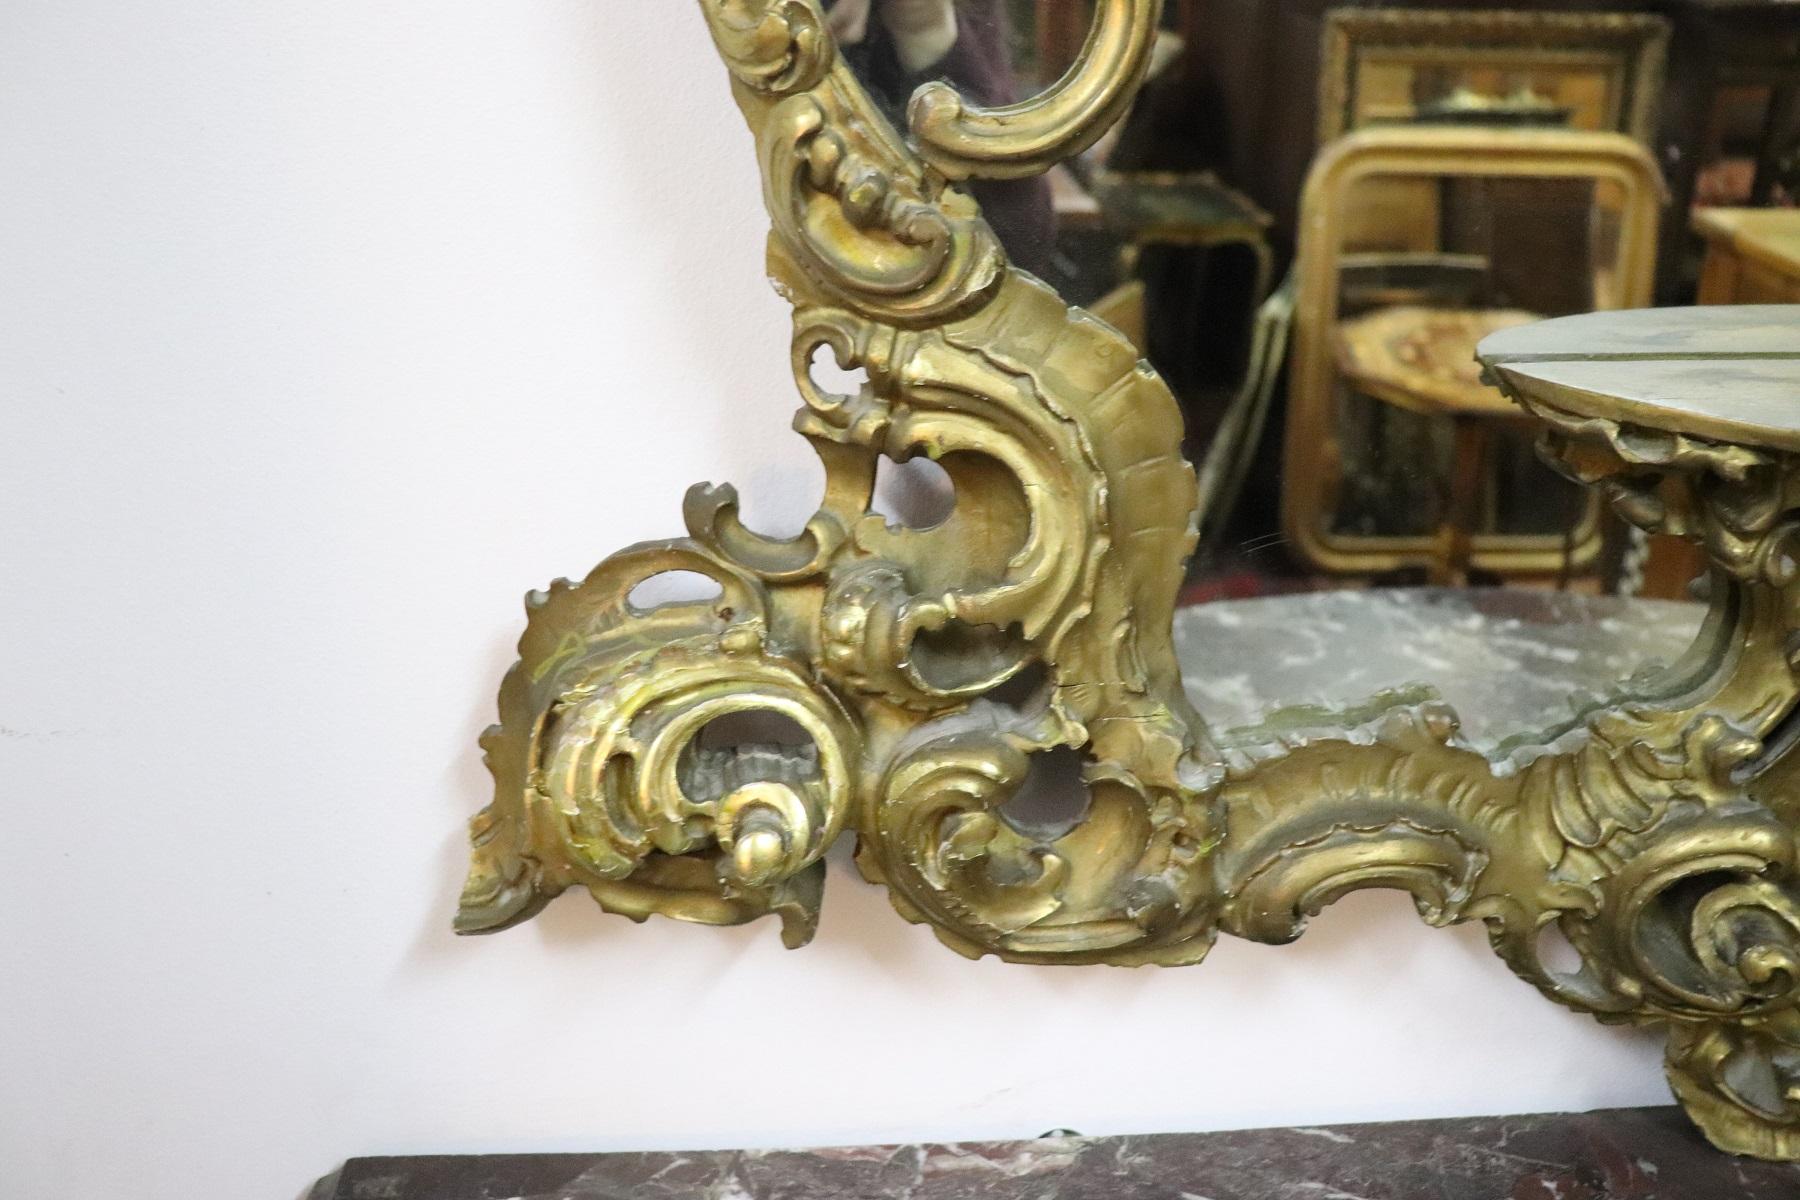 Luxury Italian Baroque style carved wood wall mirror 1950s with refined decoration in gilded wood. Very rich work in baroque style with curls and swirls. This mirror is perfect for a refined and elegant home.
 